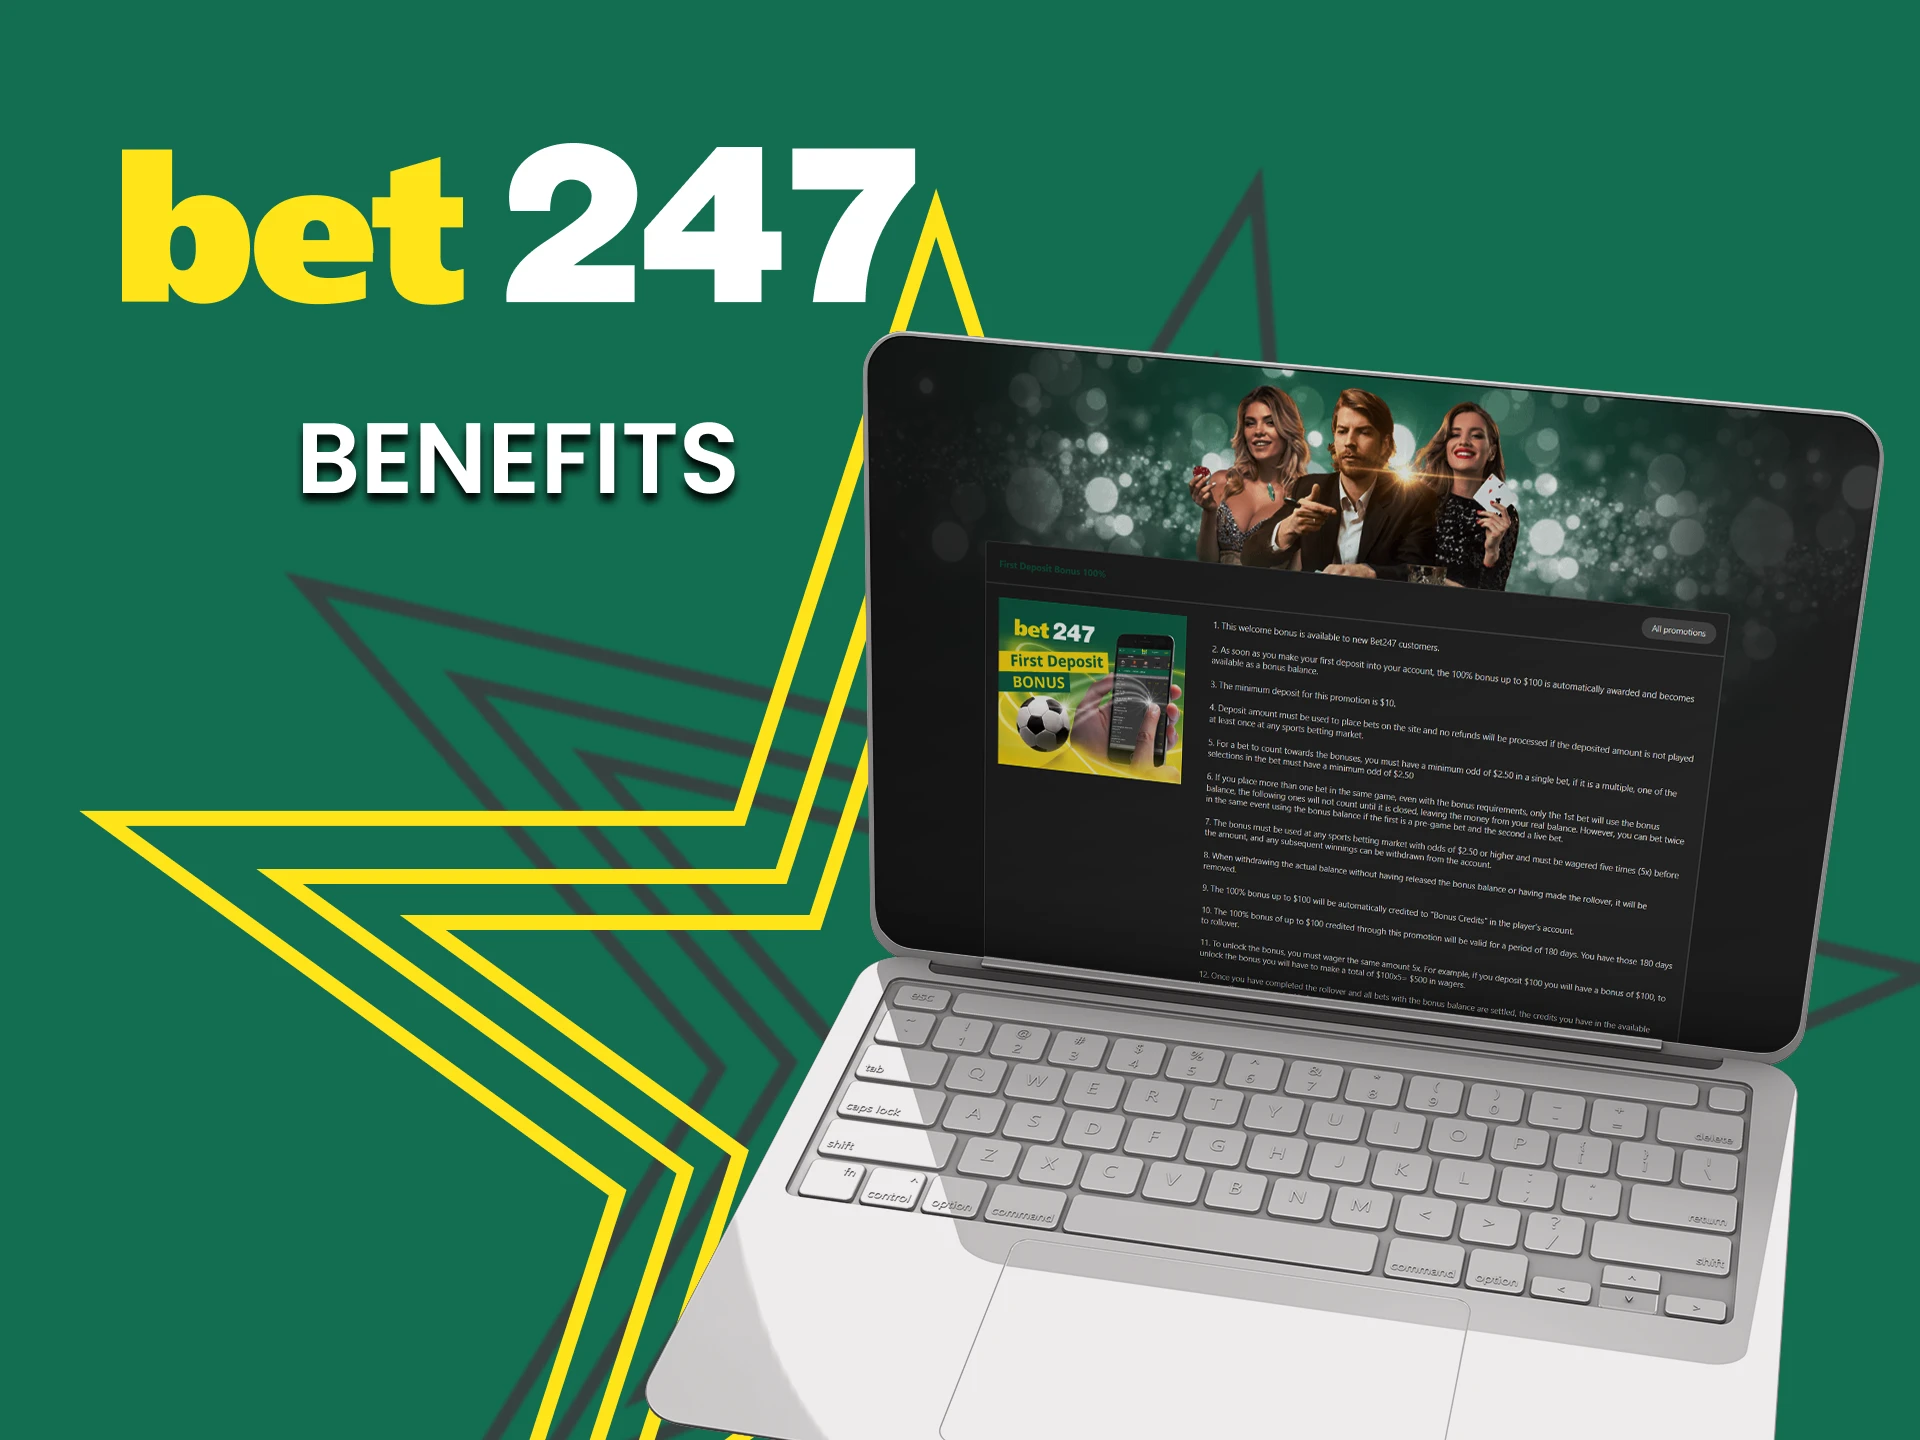 Get the best bonuses from Bet247.